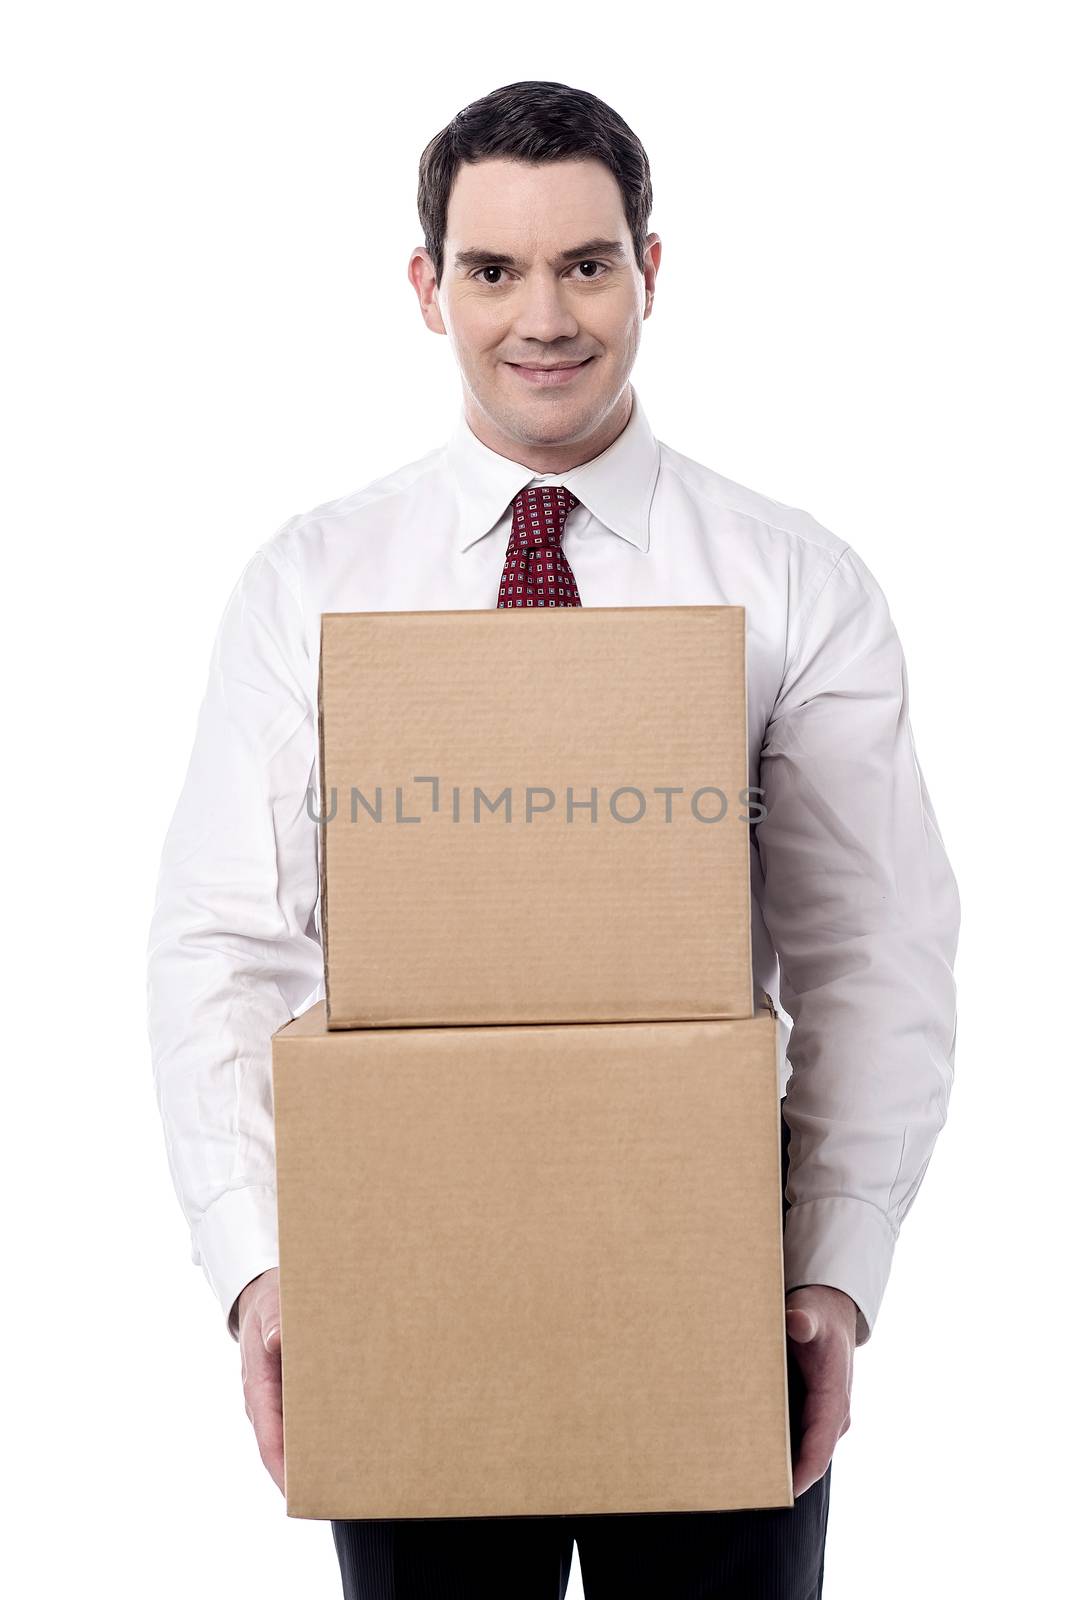 Corporate man carrying a cardboard boxes in hand